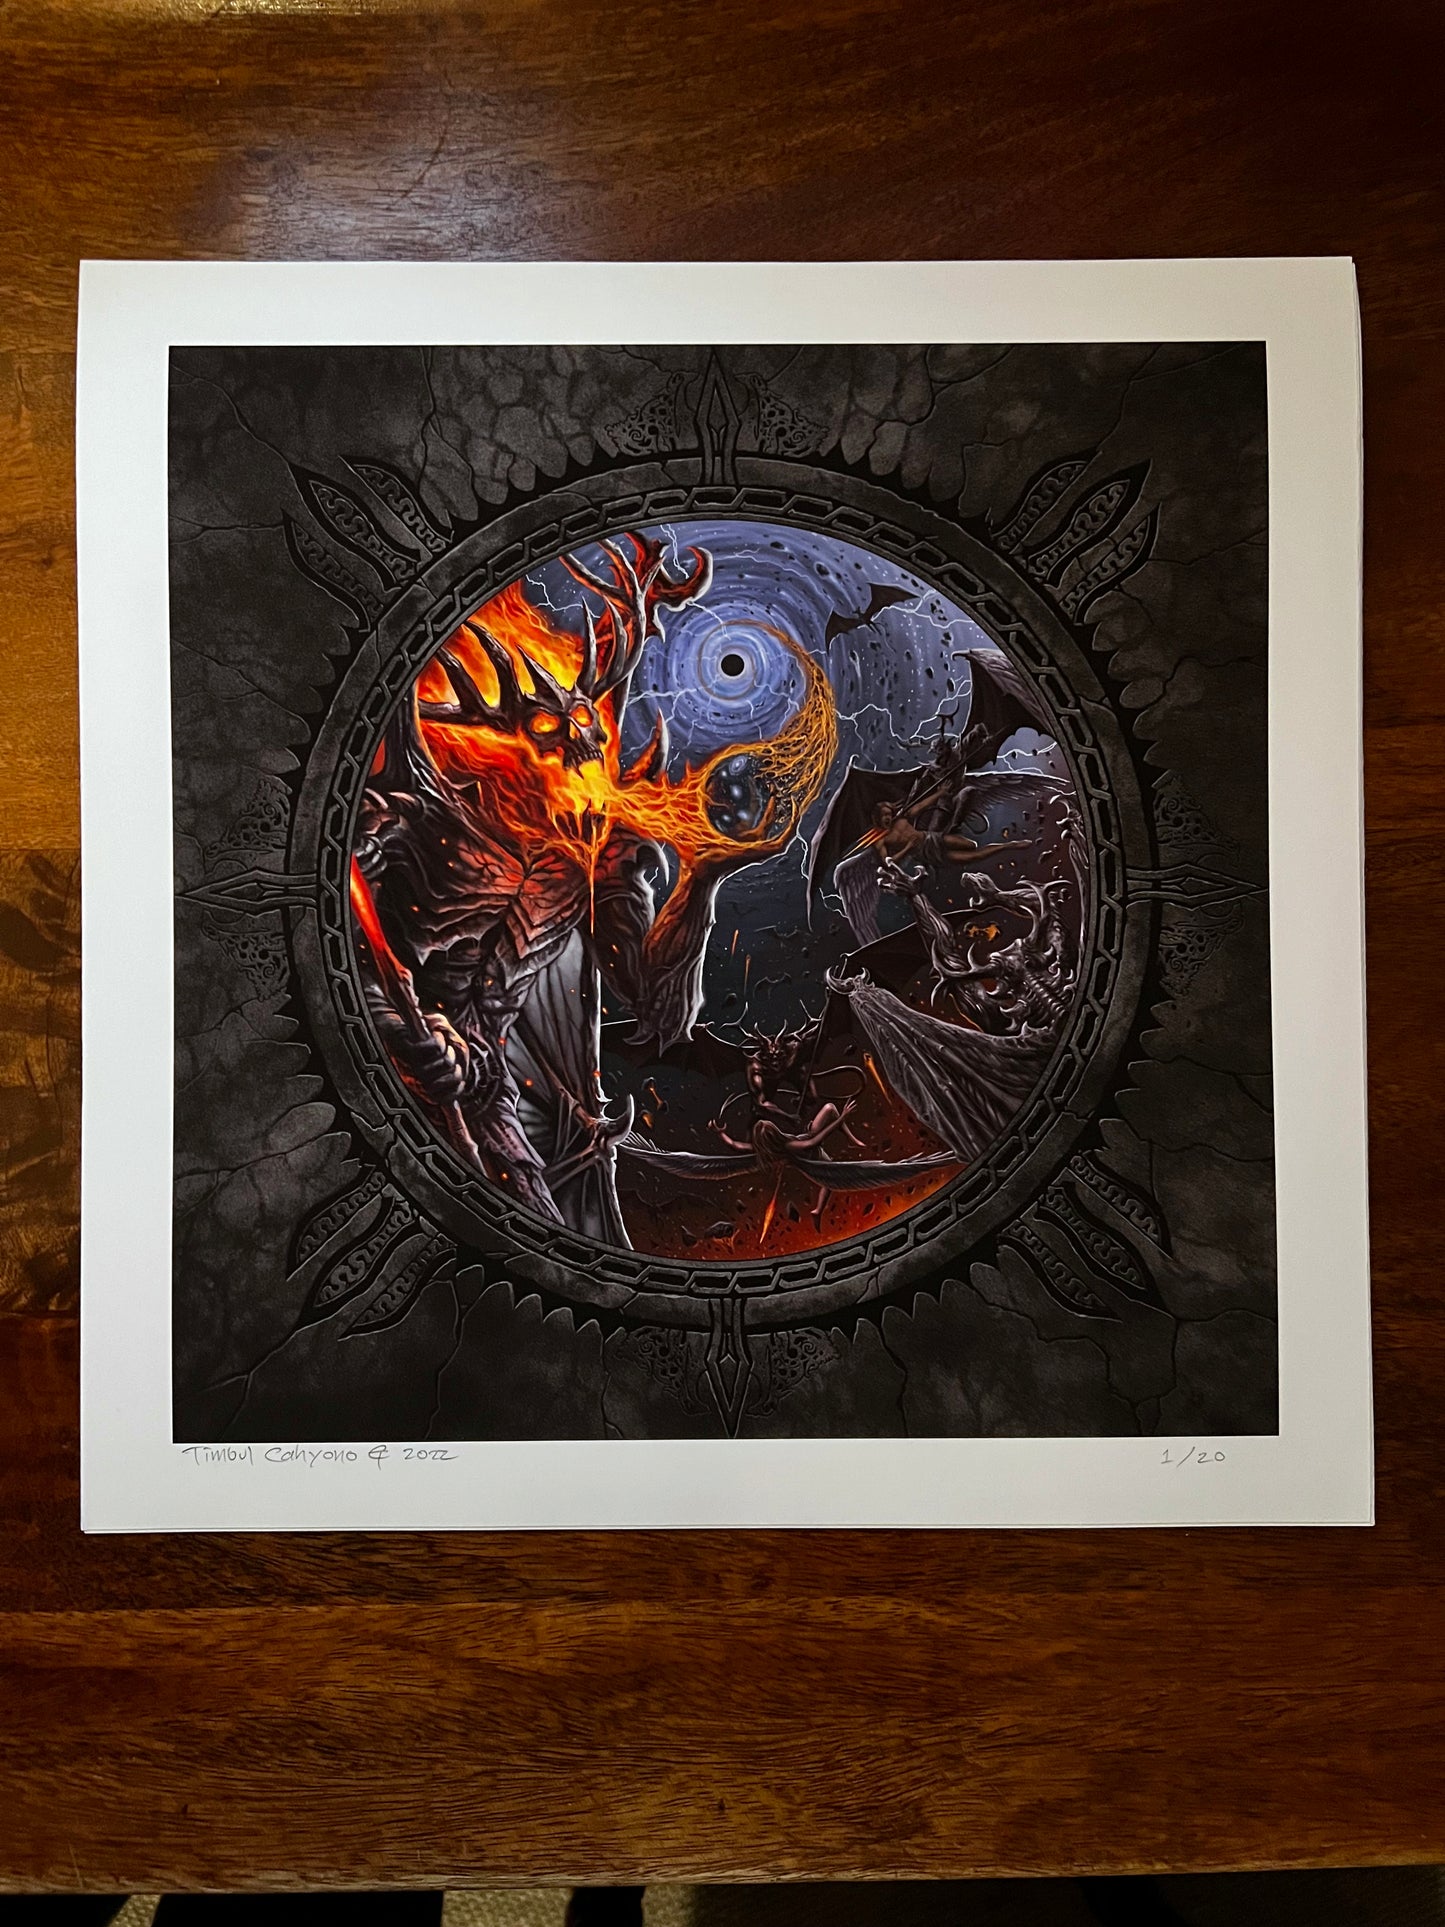 Timbul Cahyono - Monstrosity, The Passage of Existence - Signed Print